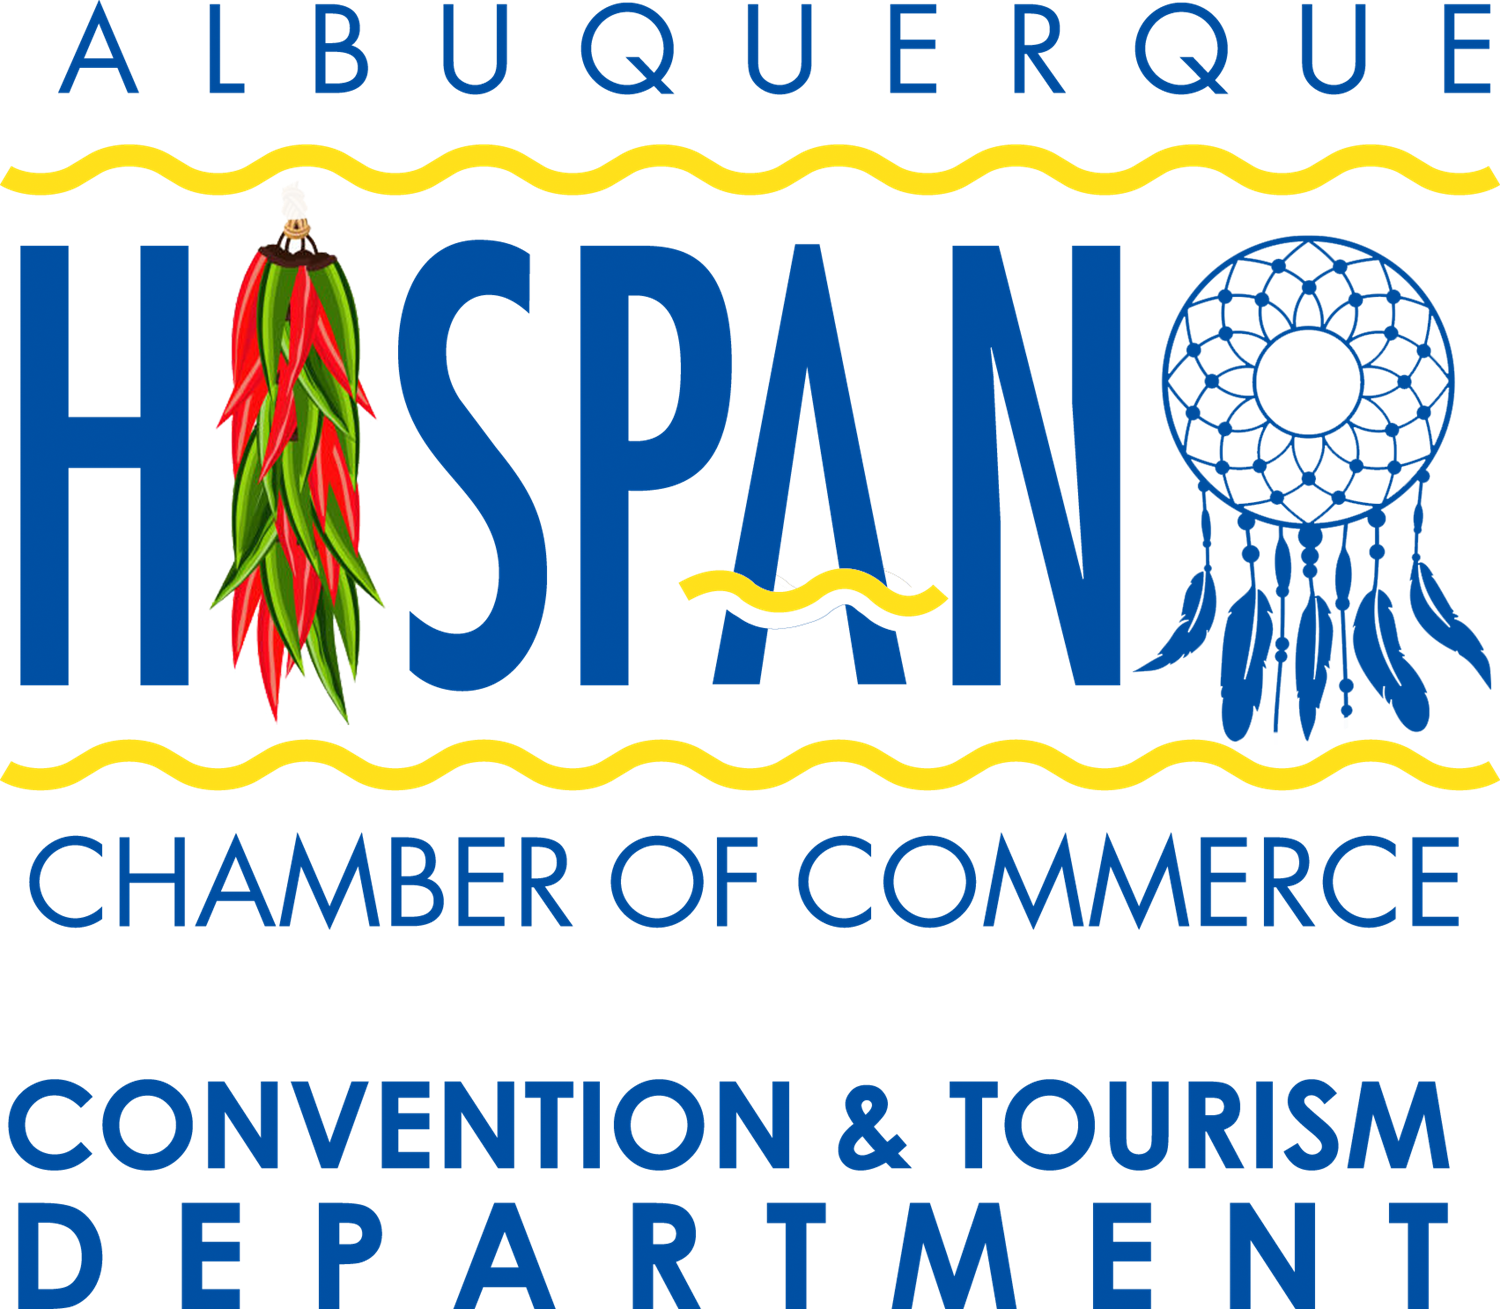 Logo for Albuquerque Hispano Chamber of Commerce Convention and Tourism Department